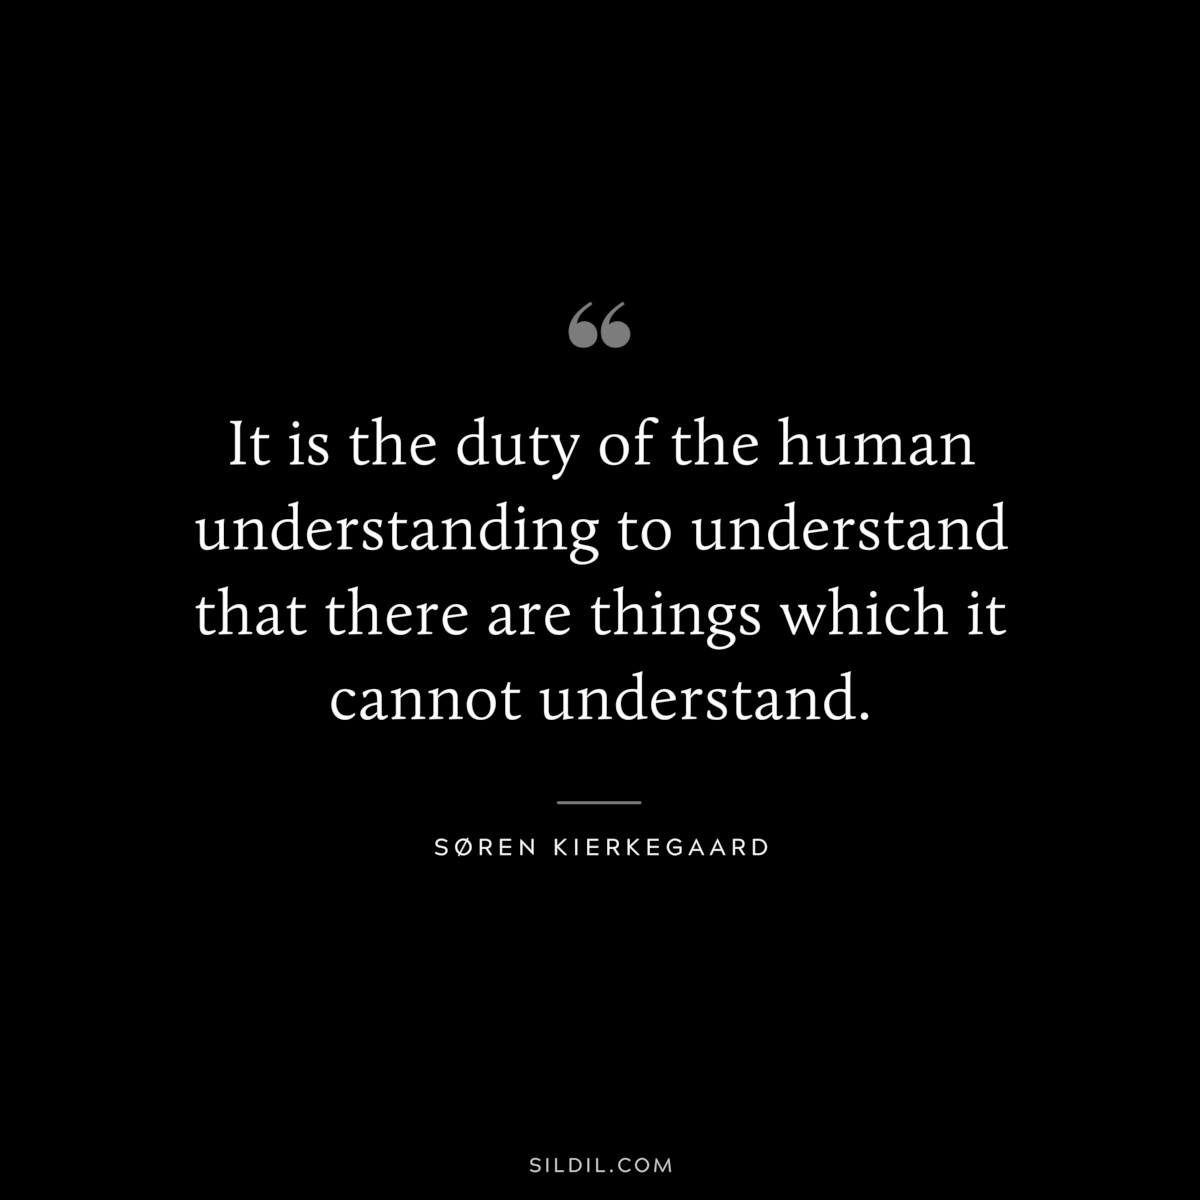 It is the duty of the human understanding to understand that there are things which it cannot understand. ― Søren Kierkegaard